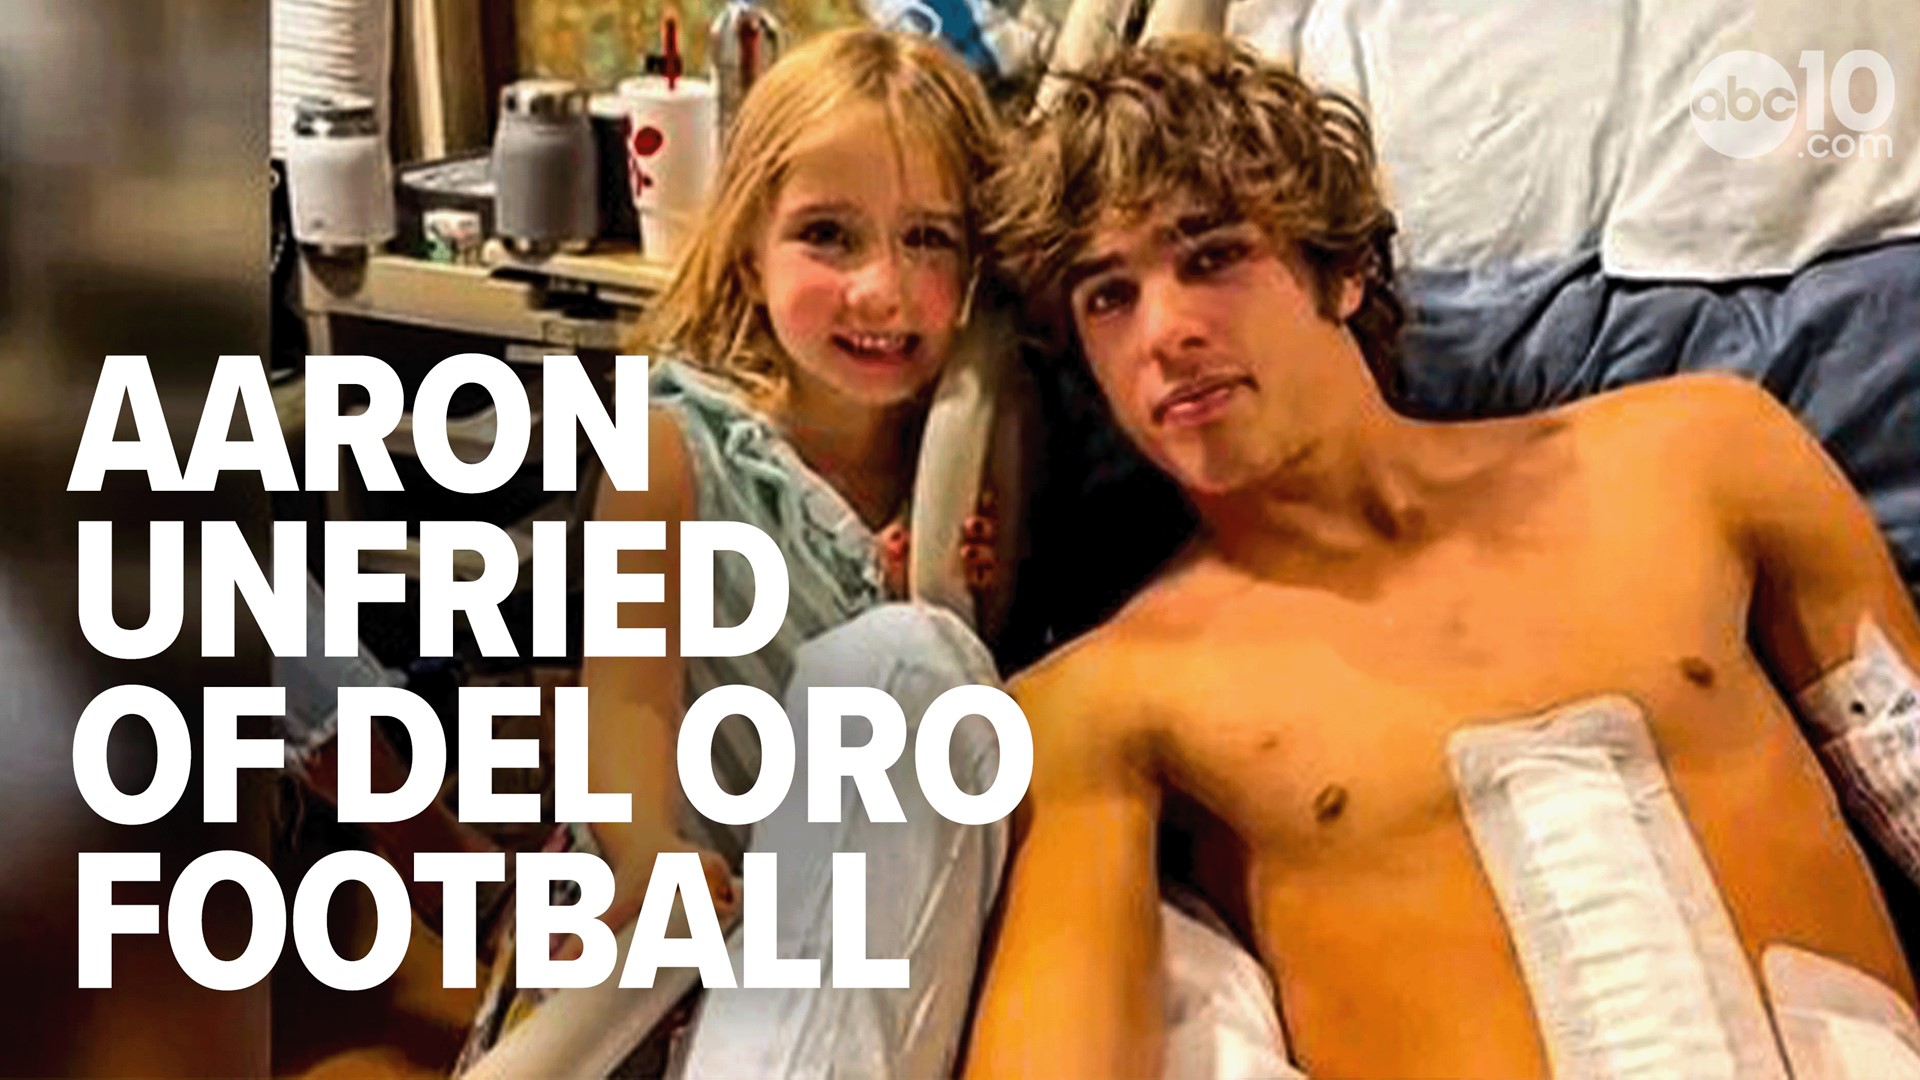 Del Oro Football player Aaron Unfried said he's come a long way since almost losing his professional sports career to a major injury.